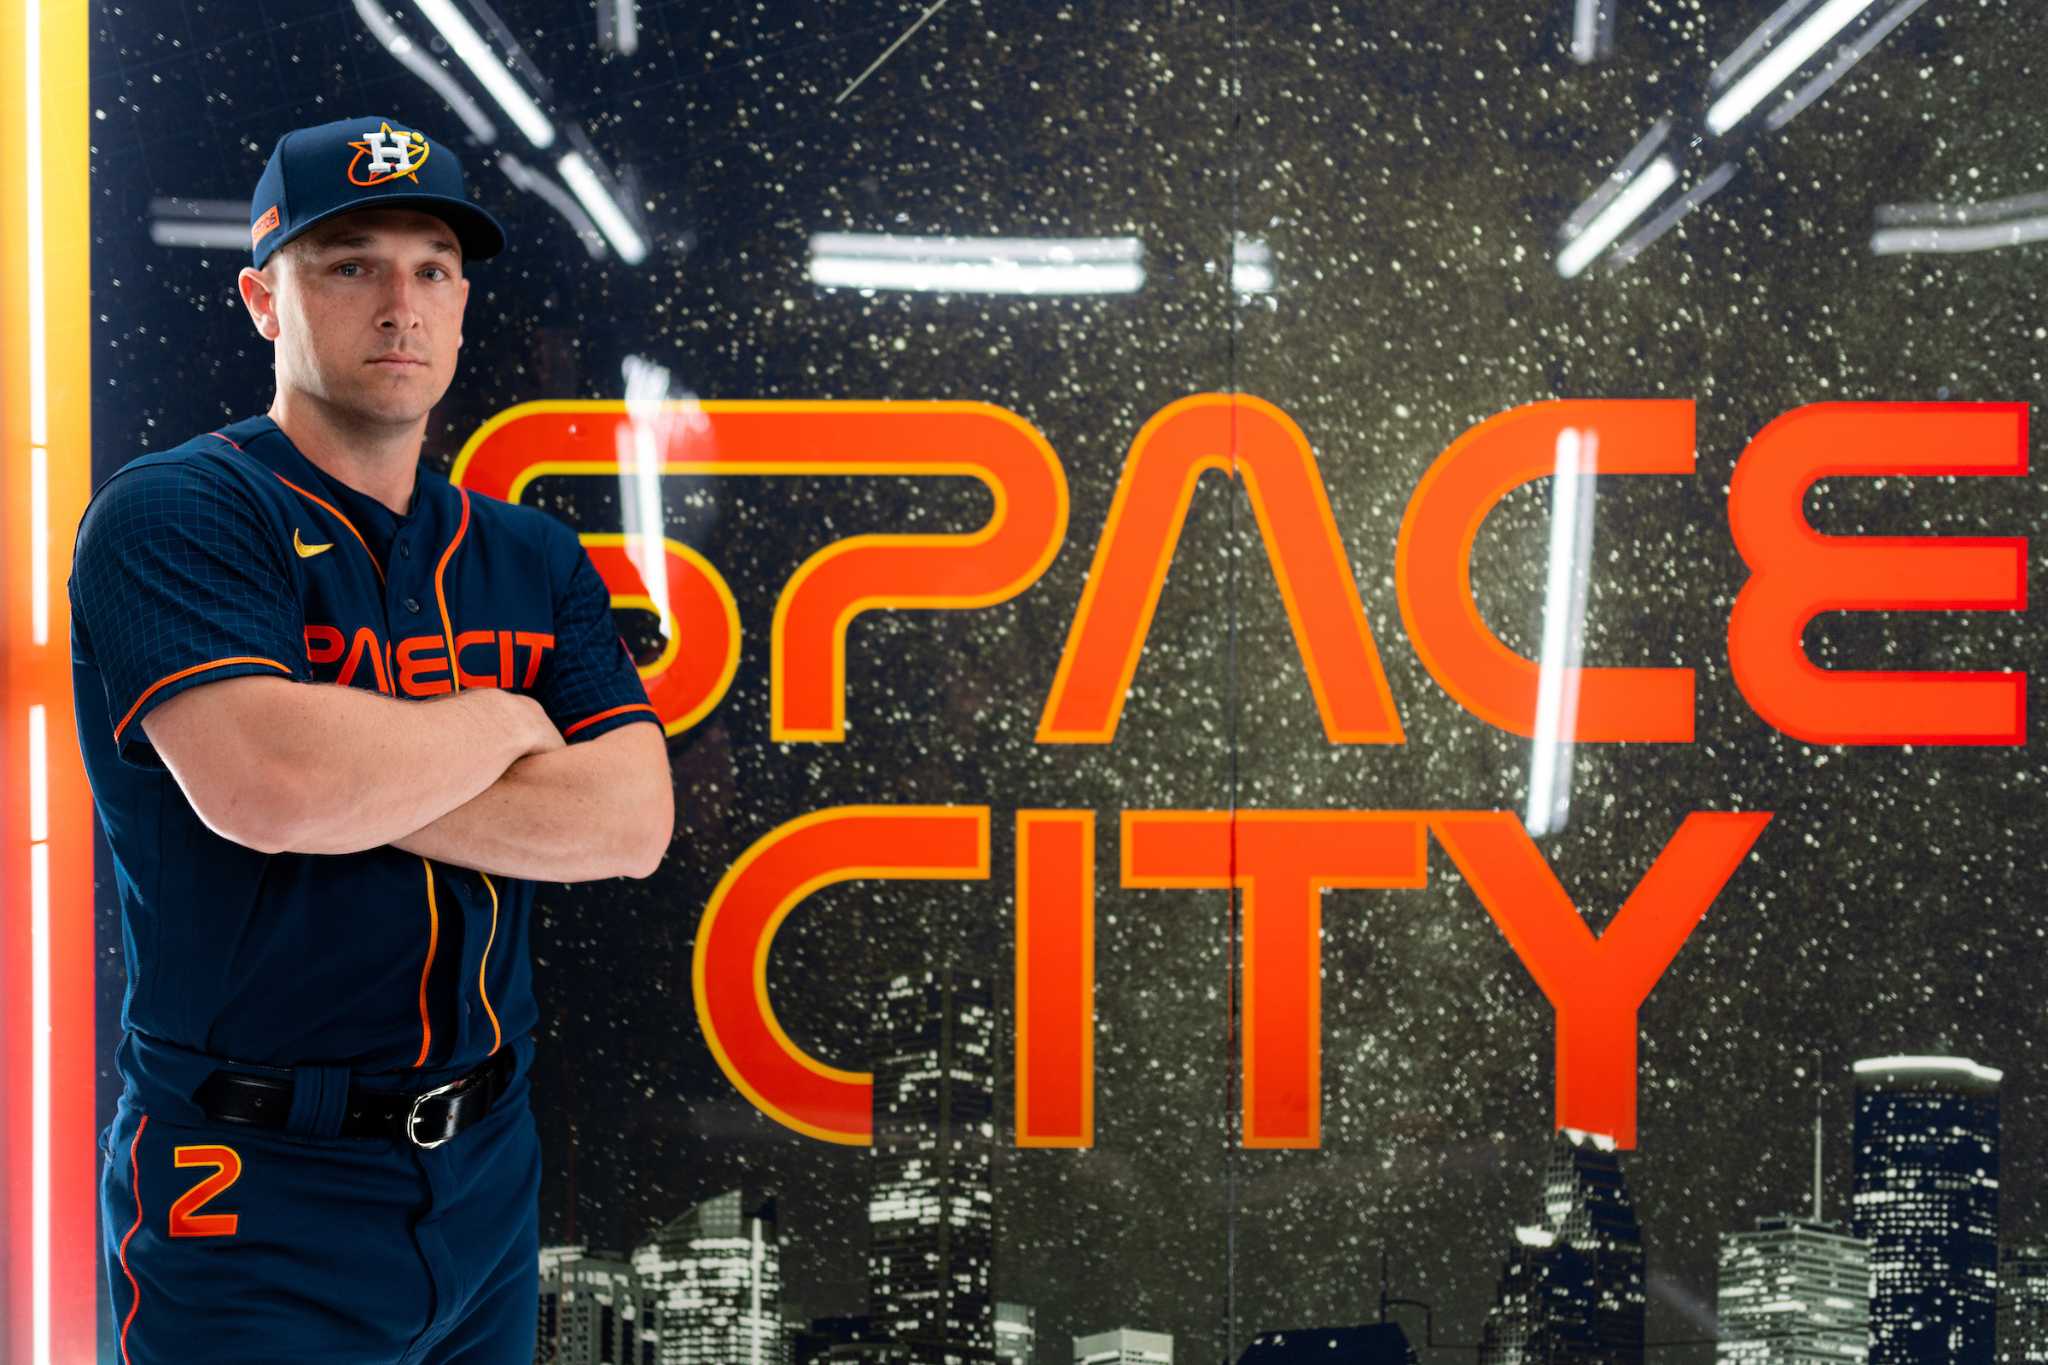 The details behind Astros' City Connect uniforms that salute Space City